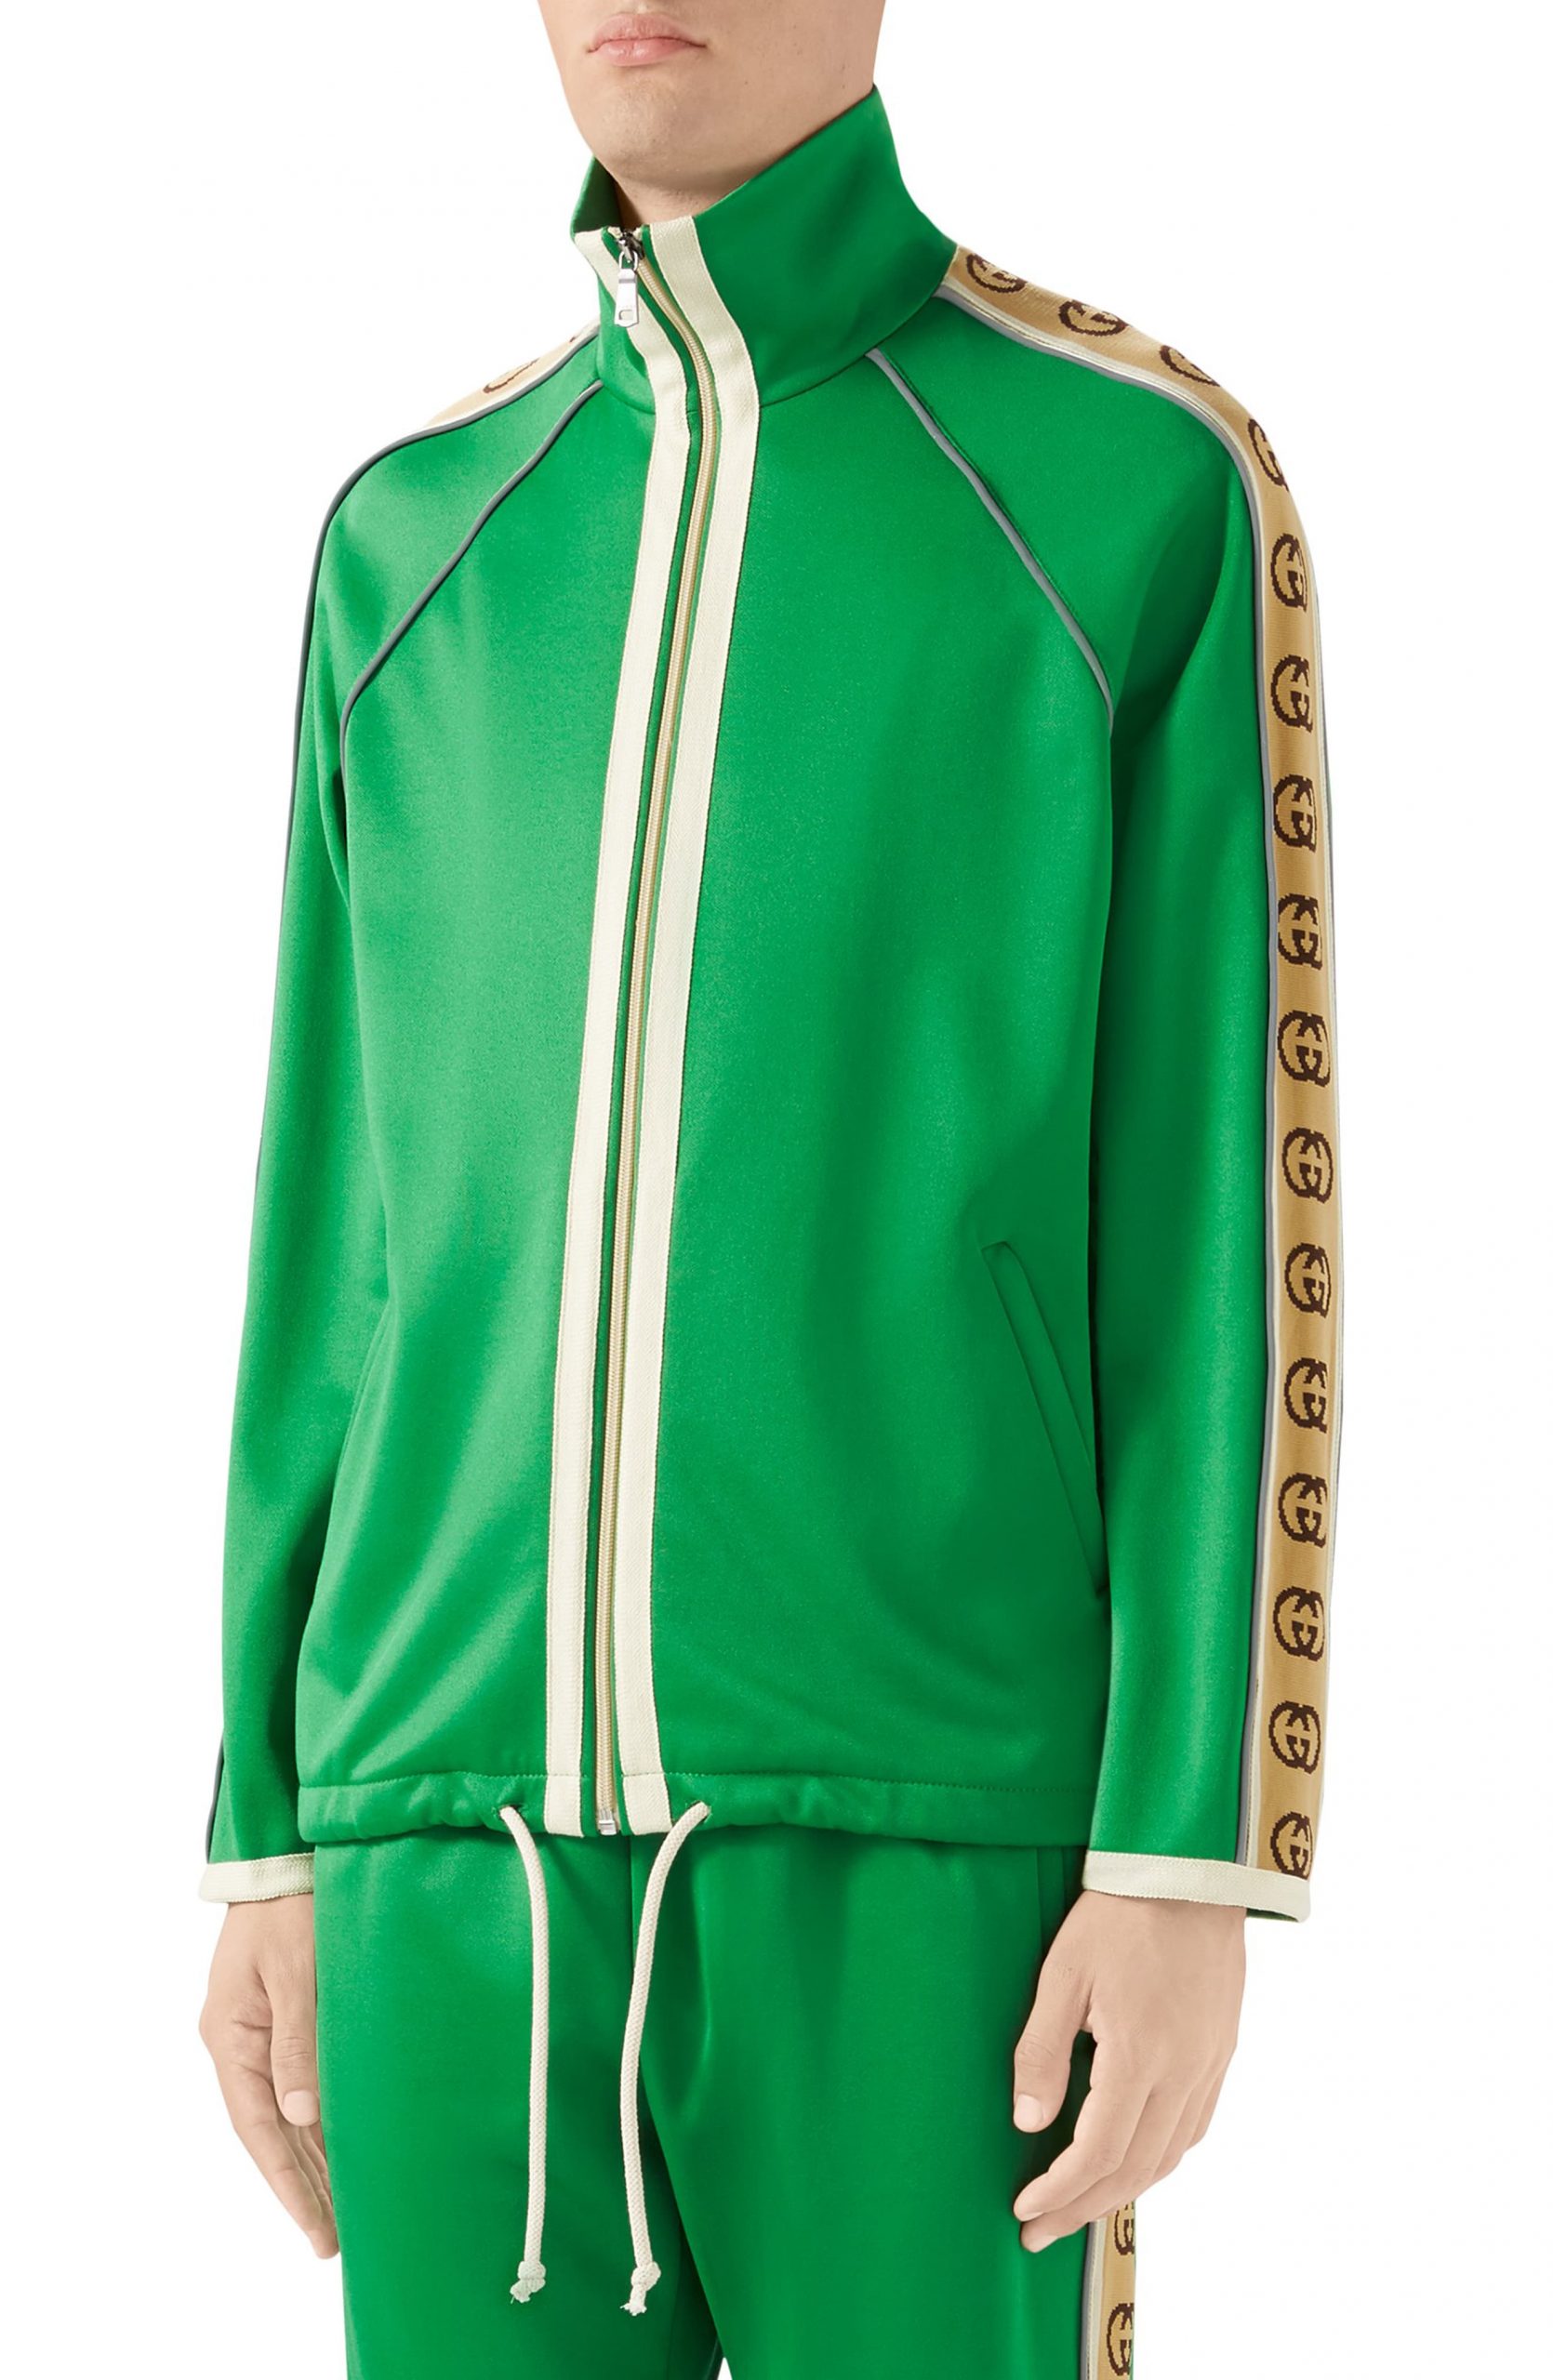 Men’s Gucci Oversize Technical Jersey Jacket, Size Small - Green | The ...